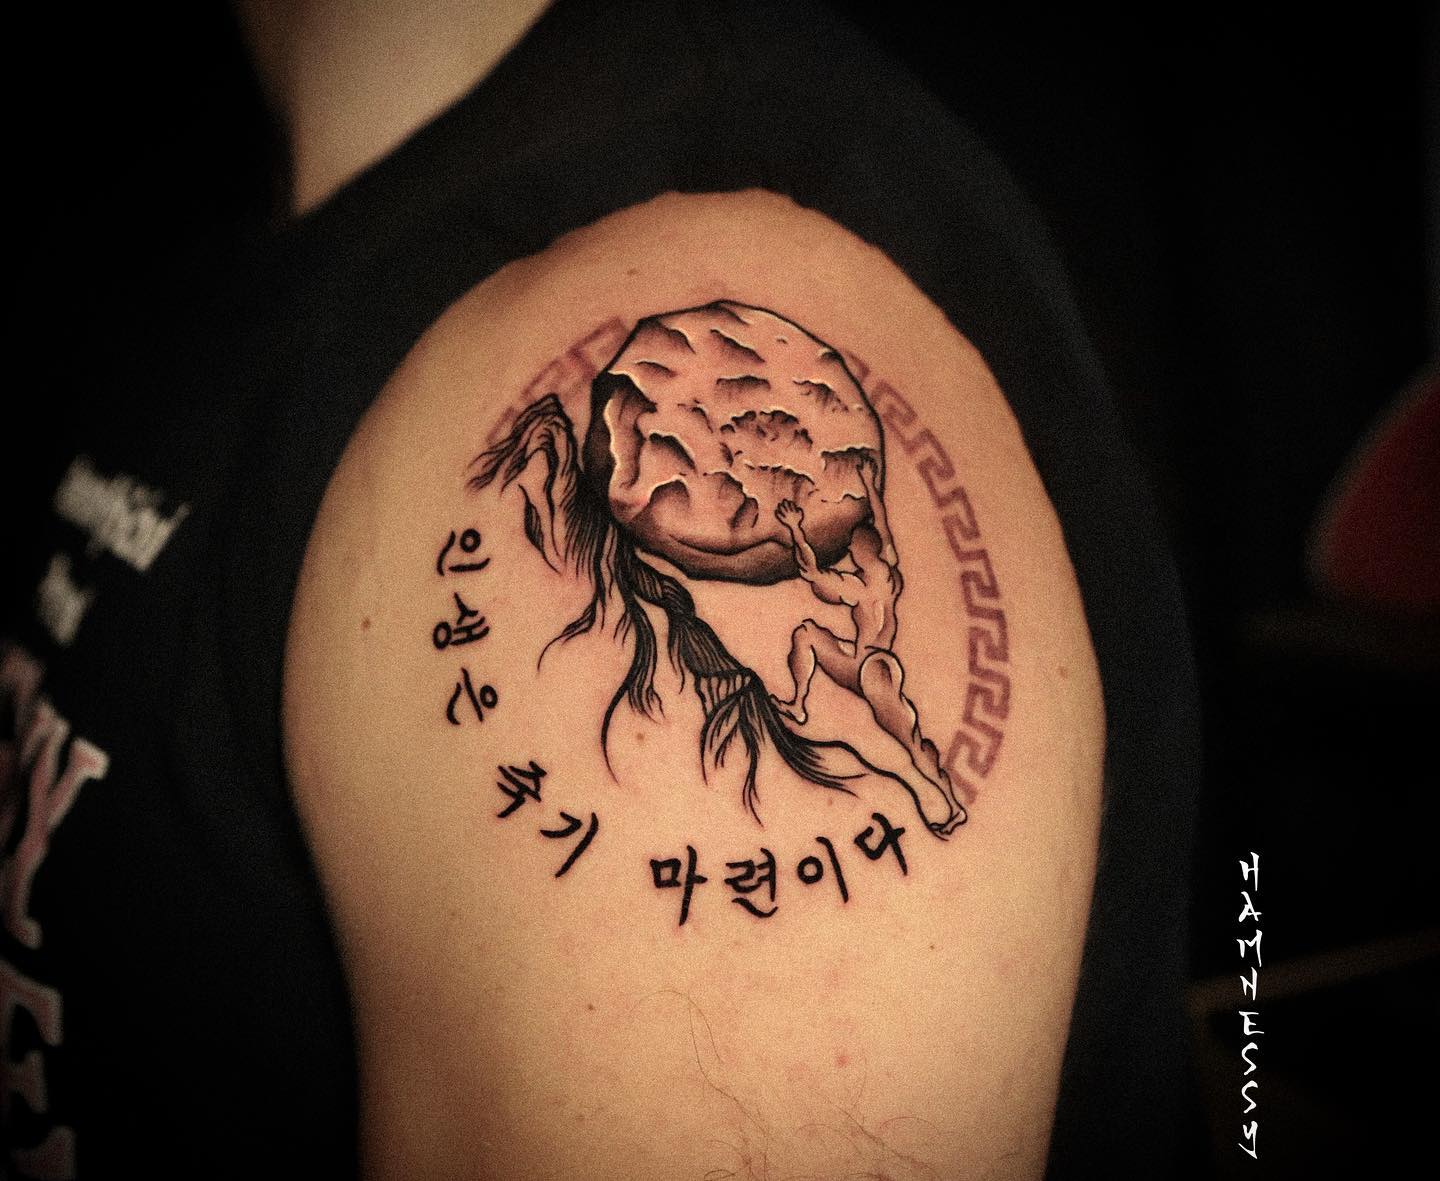 A sisyphus is a stunning and eye-catching tattoo to get. You should go for it.